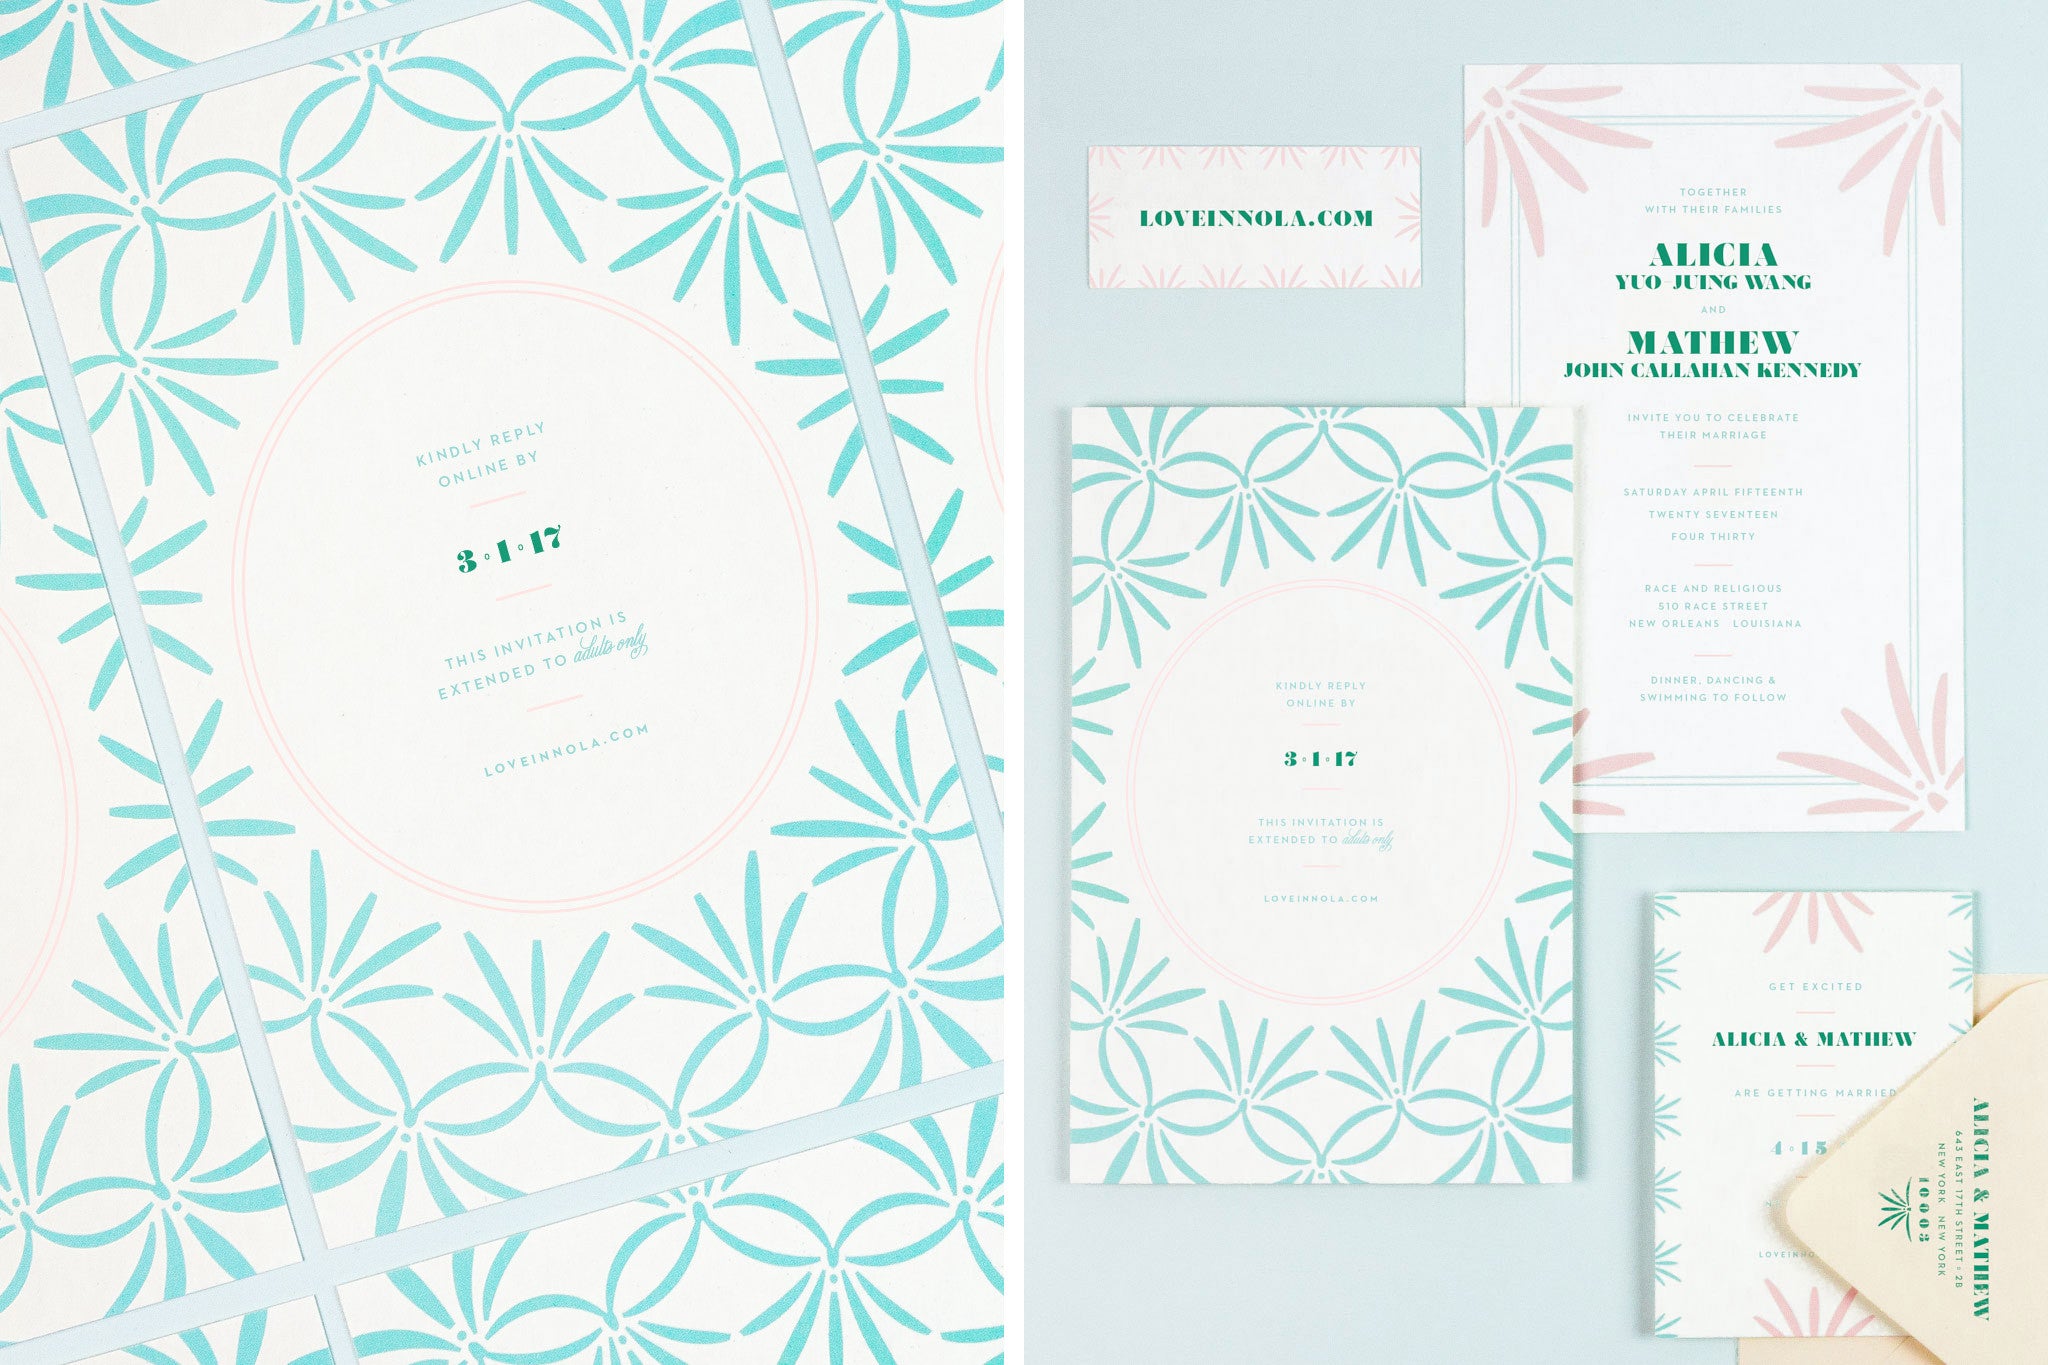 My Darlin' • Tropical Meets Deco Pastel Wedding Invitations and Save the Date for a Tax Day in Nola Wedding • www.mydarl.in